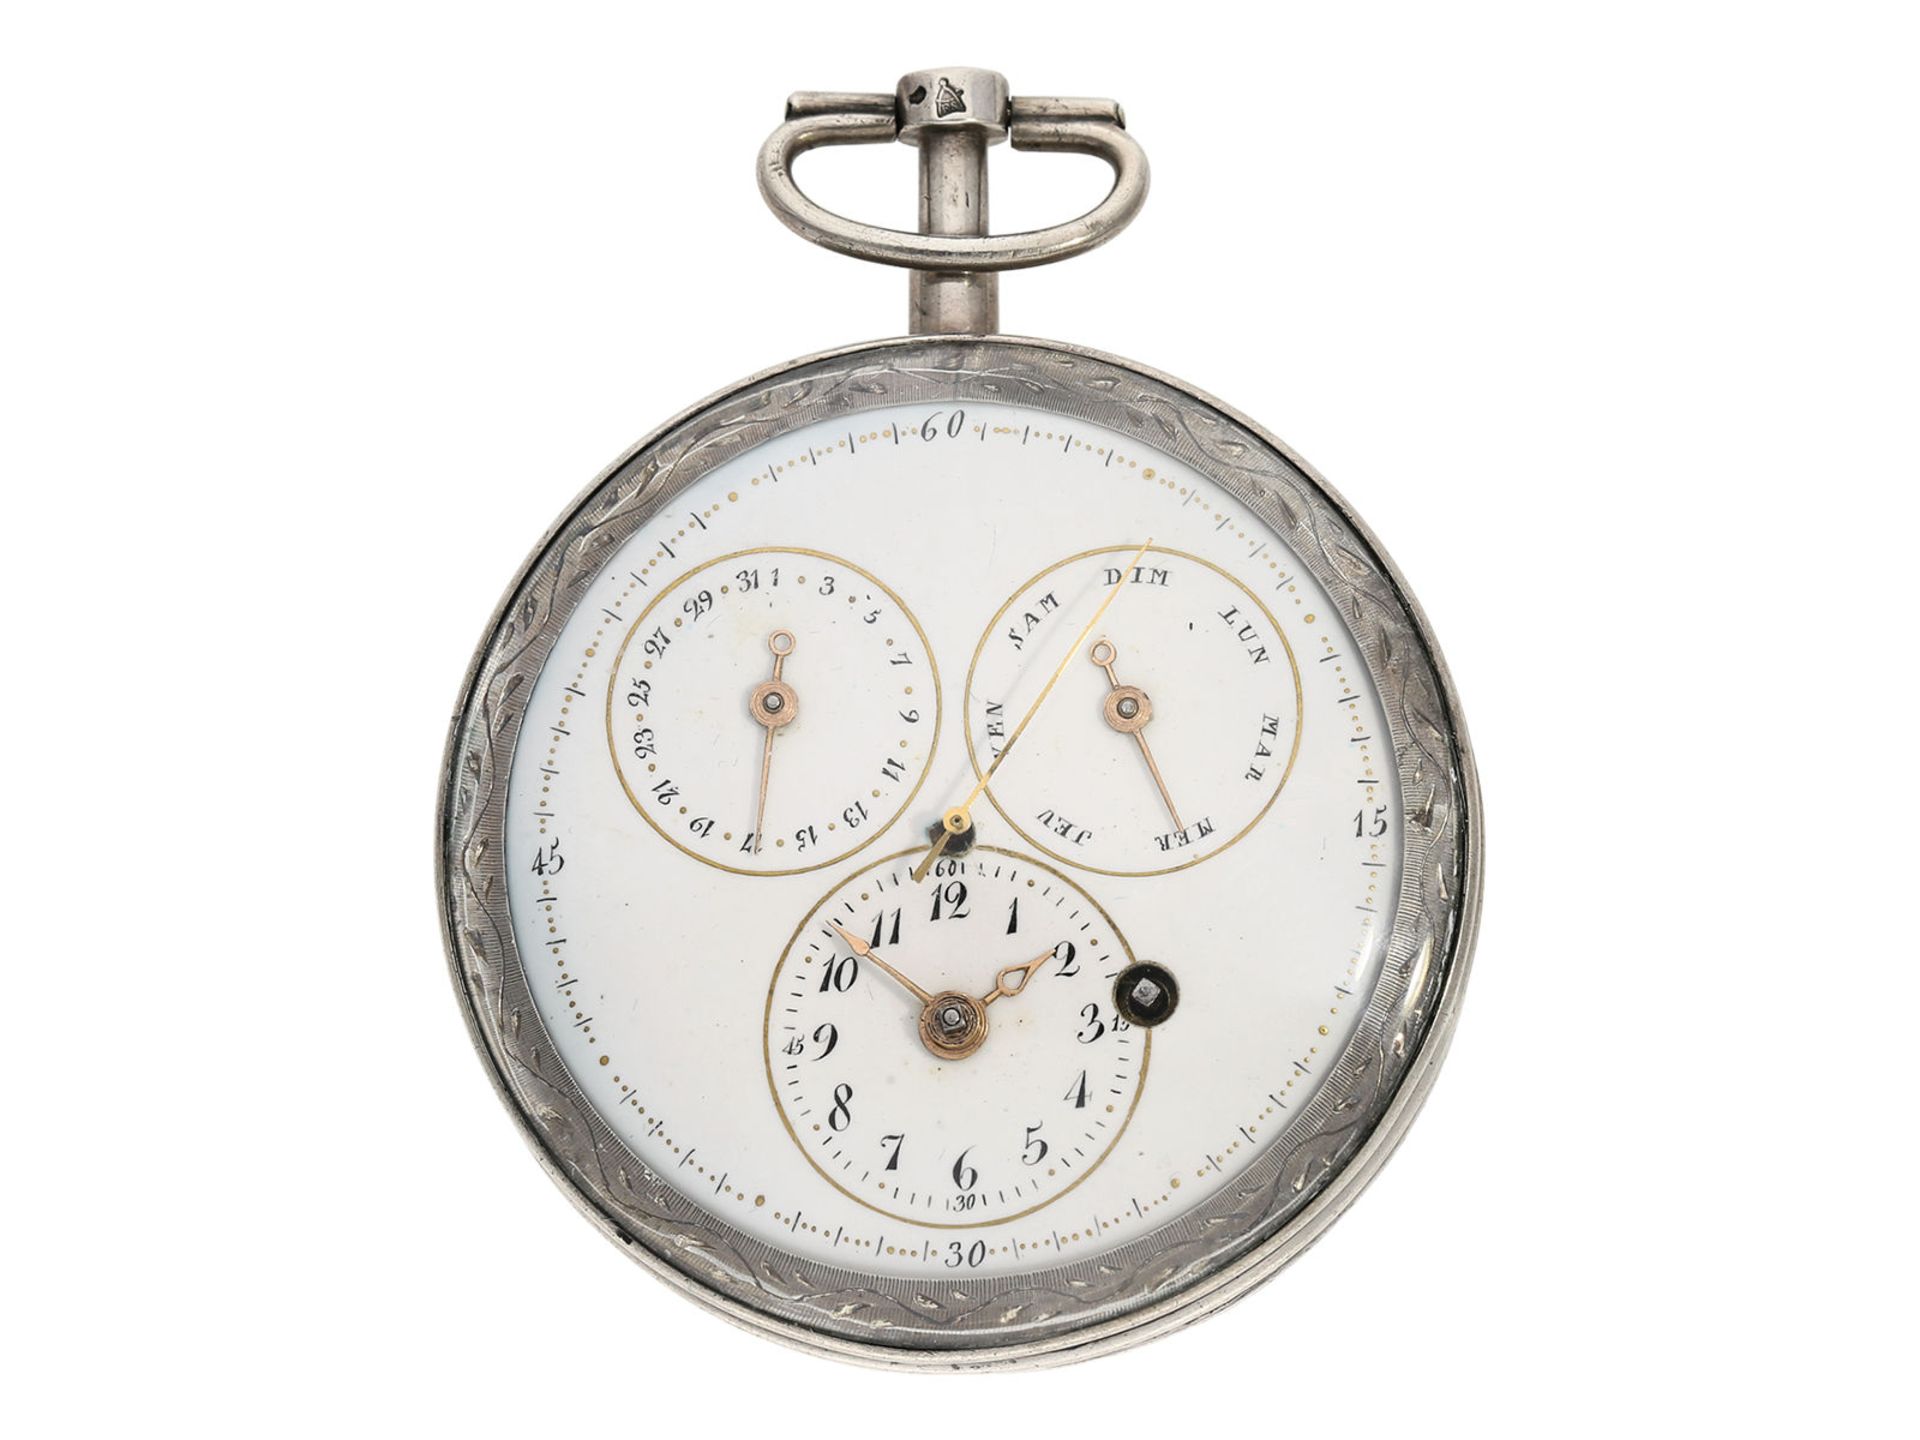 Pocket watch: rare verge watch with calendar and centre seconds, probably France around 1800